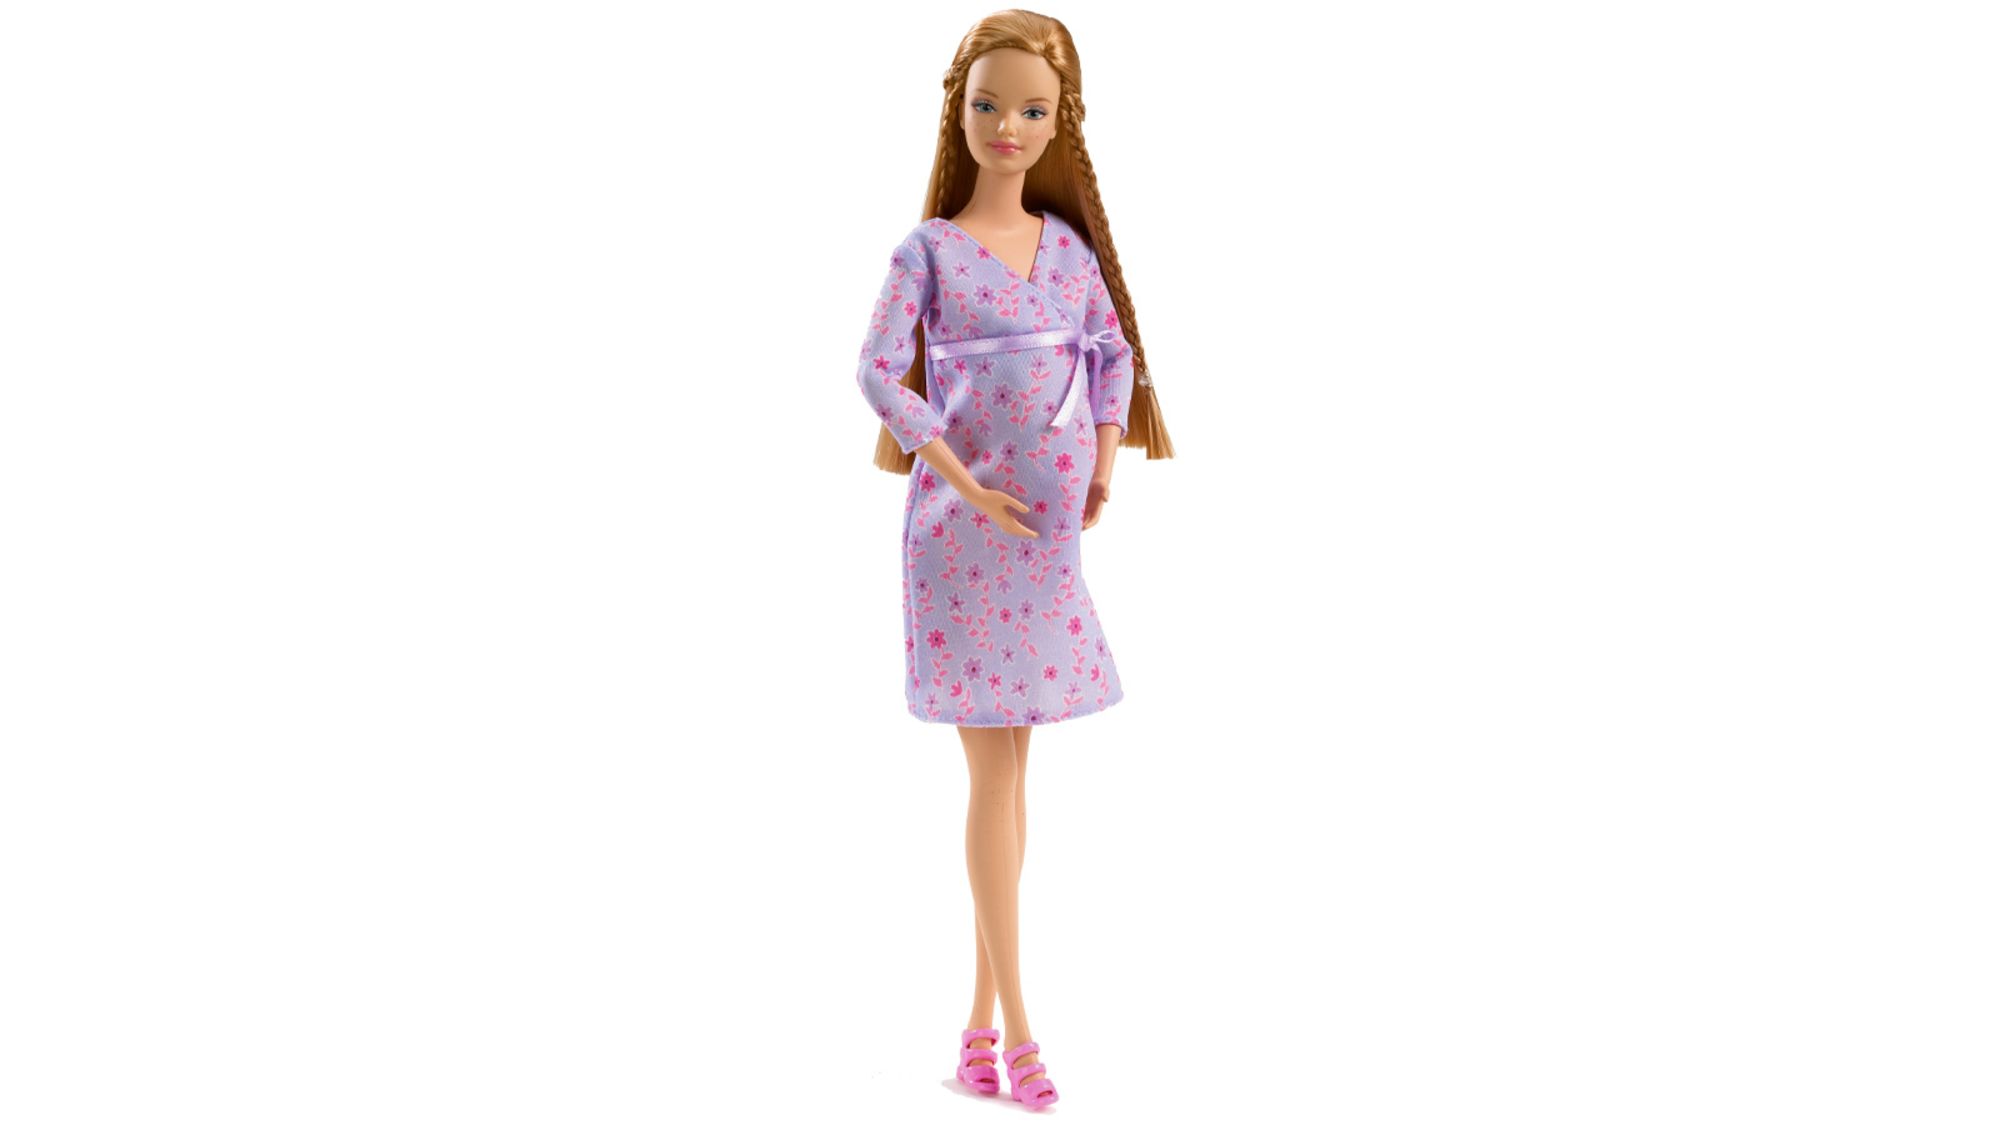 Why Midge, Barbie's controversial best friend, is due for a